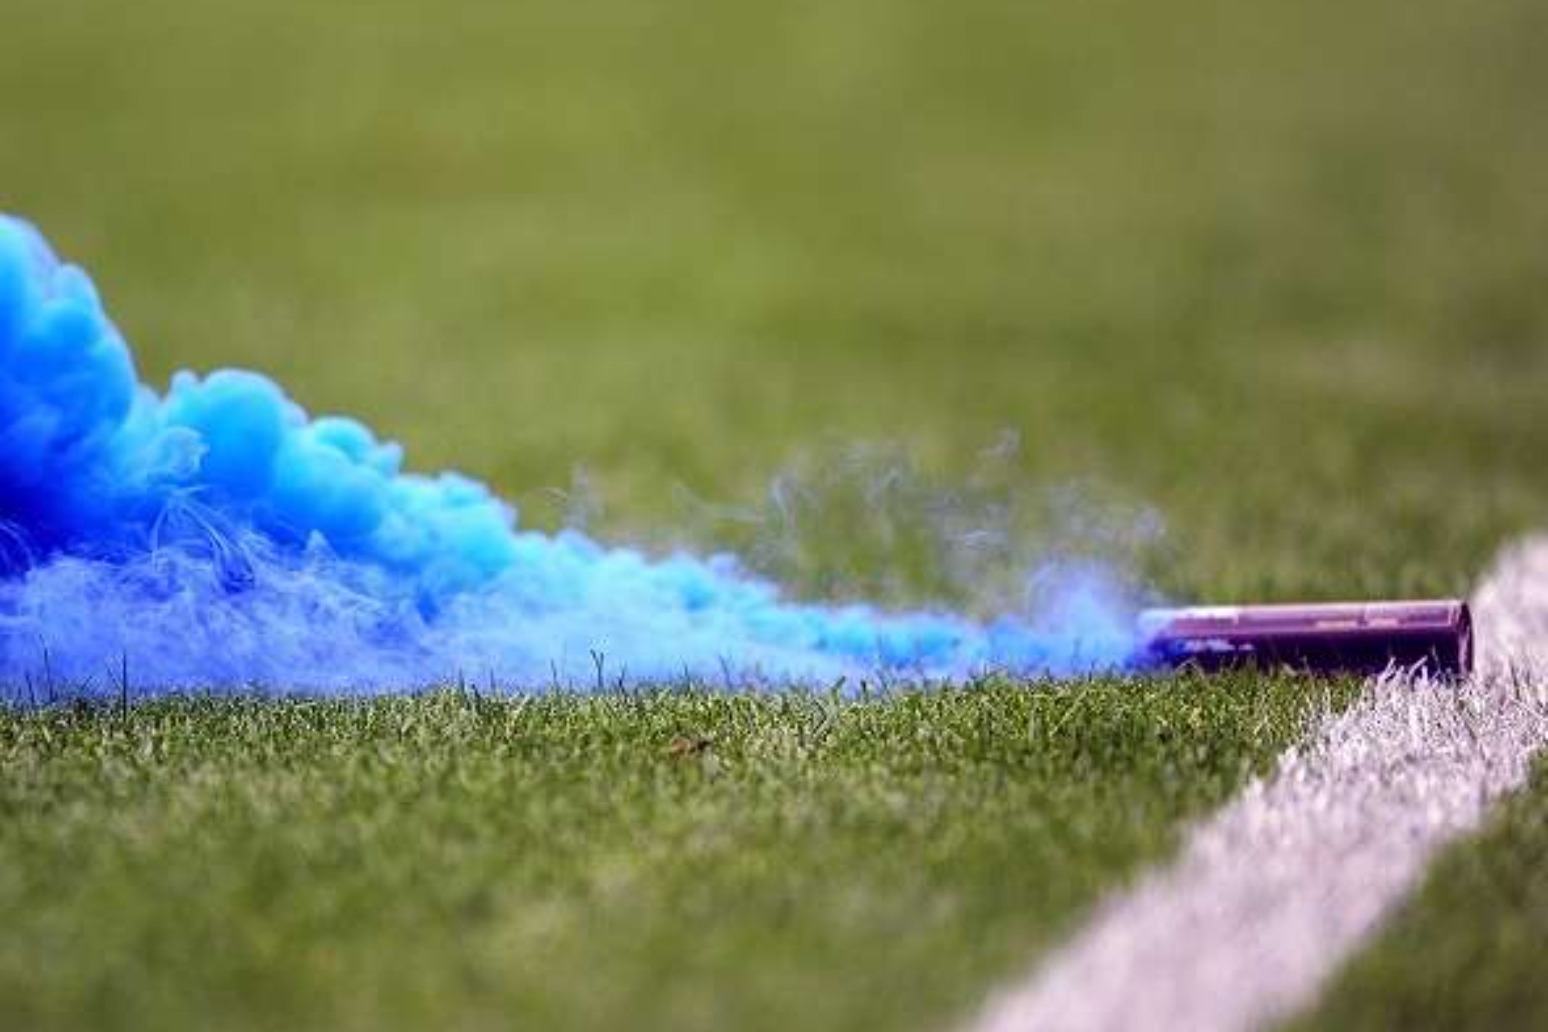 Four arrests after flare thrown onto pitch during FA Cup tie 